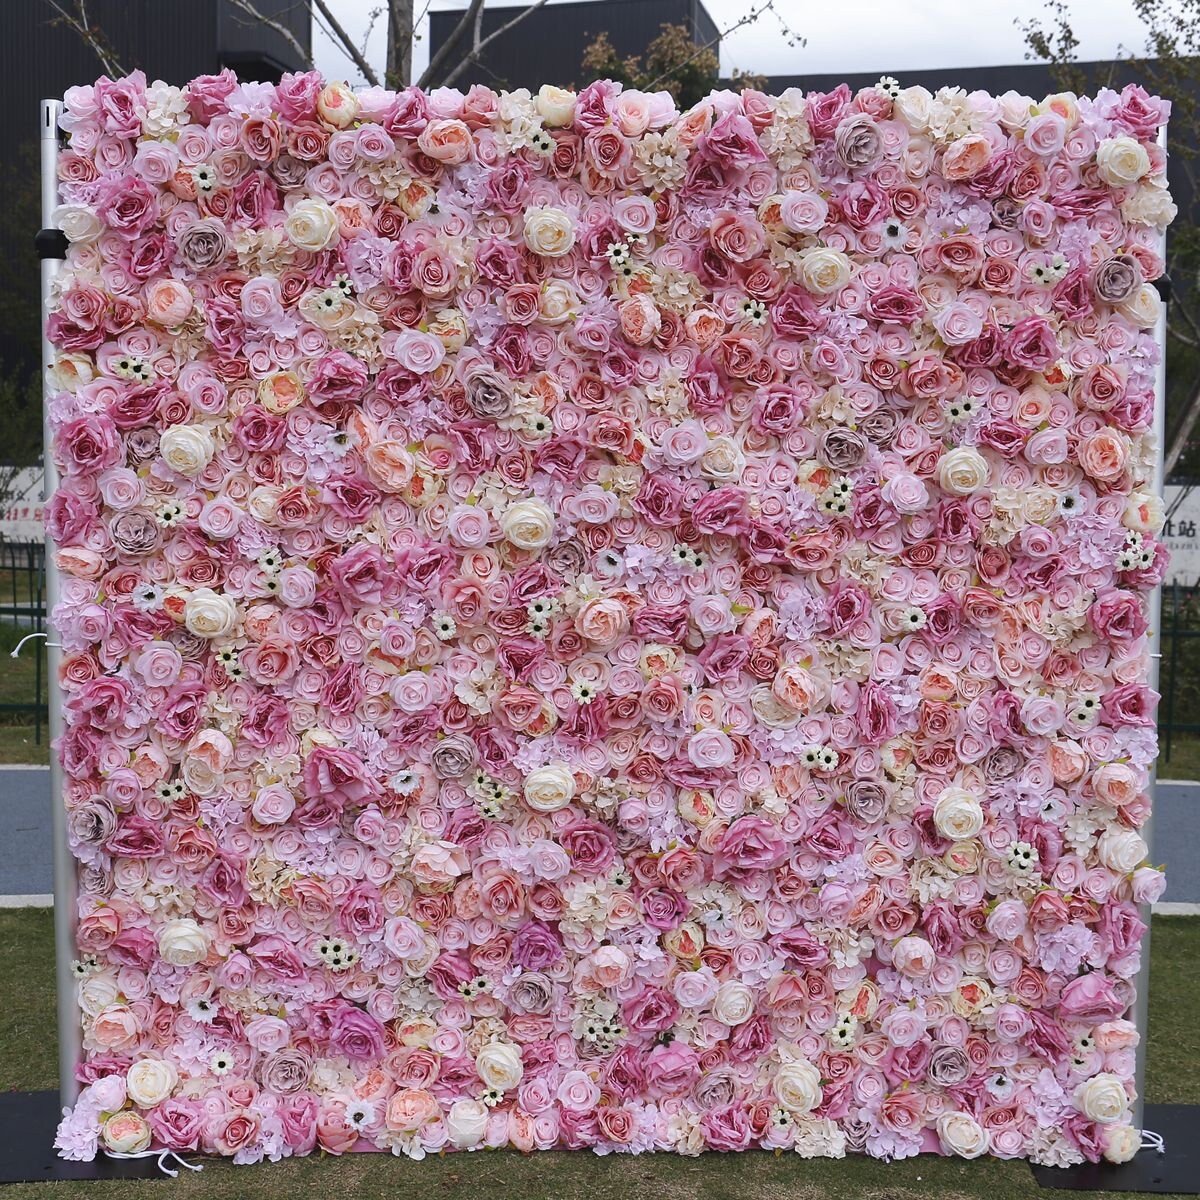 Pink Flower Wall For Wedding Arrangement Event Salon Party Photography Backdrop Fabric Rolling Up Curtain Fabric Cloth